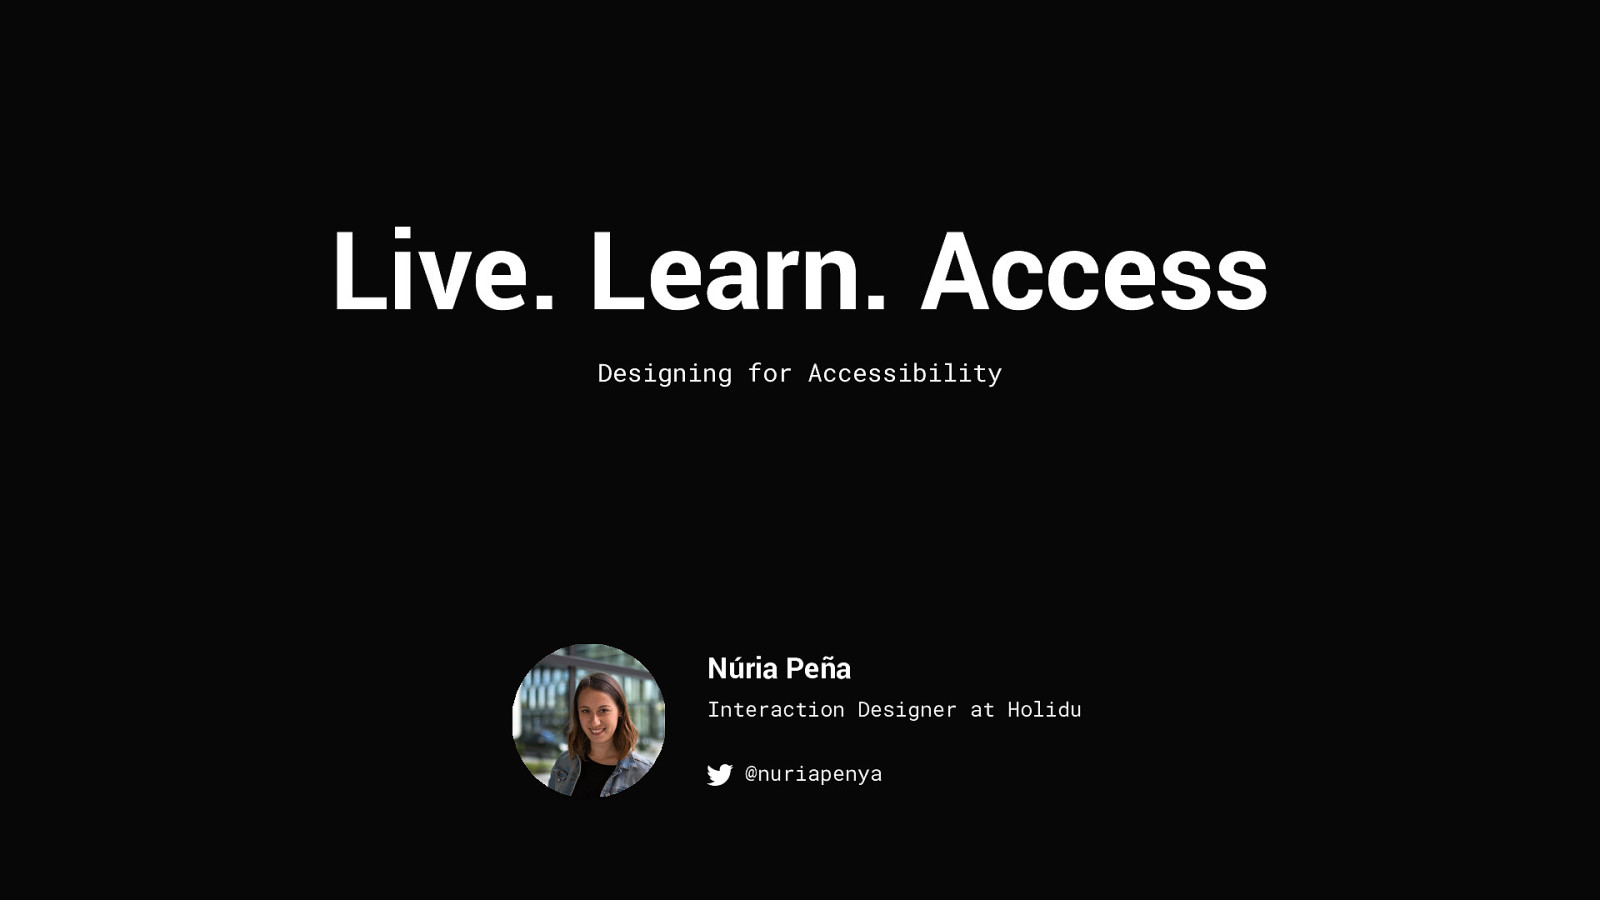 Live. Learn. Access. Designing for Accessibility